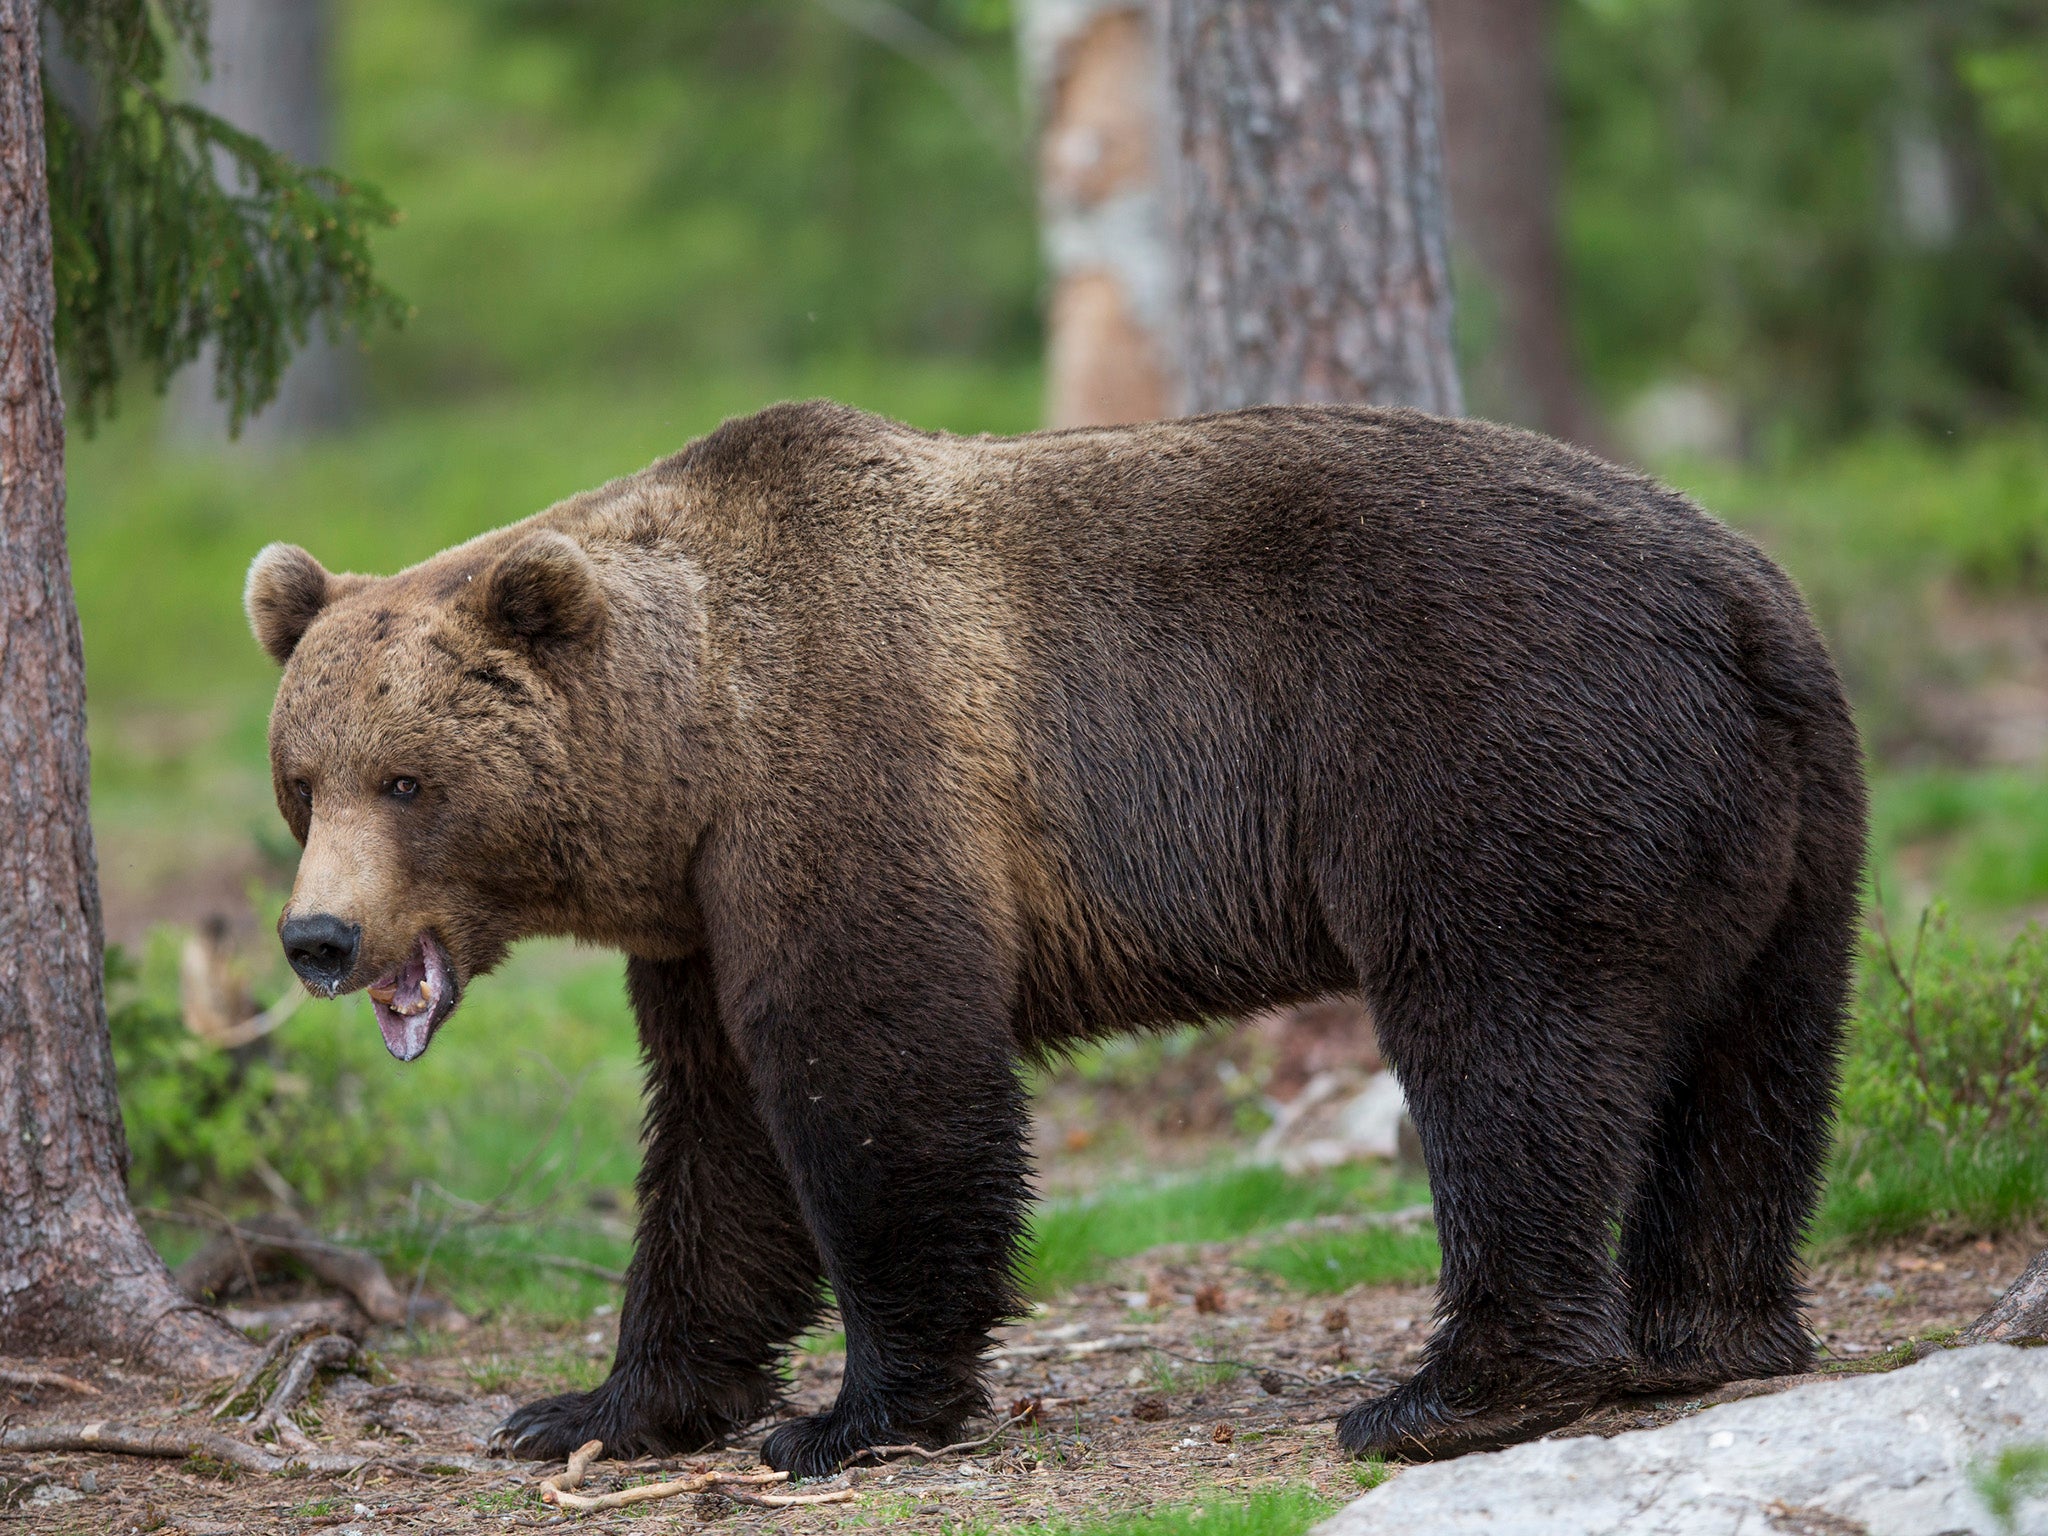 Since 2007, 2,374 bears have been shot by hunters in Romania